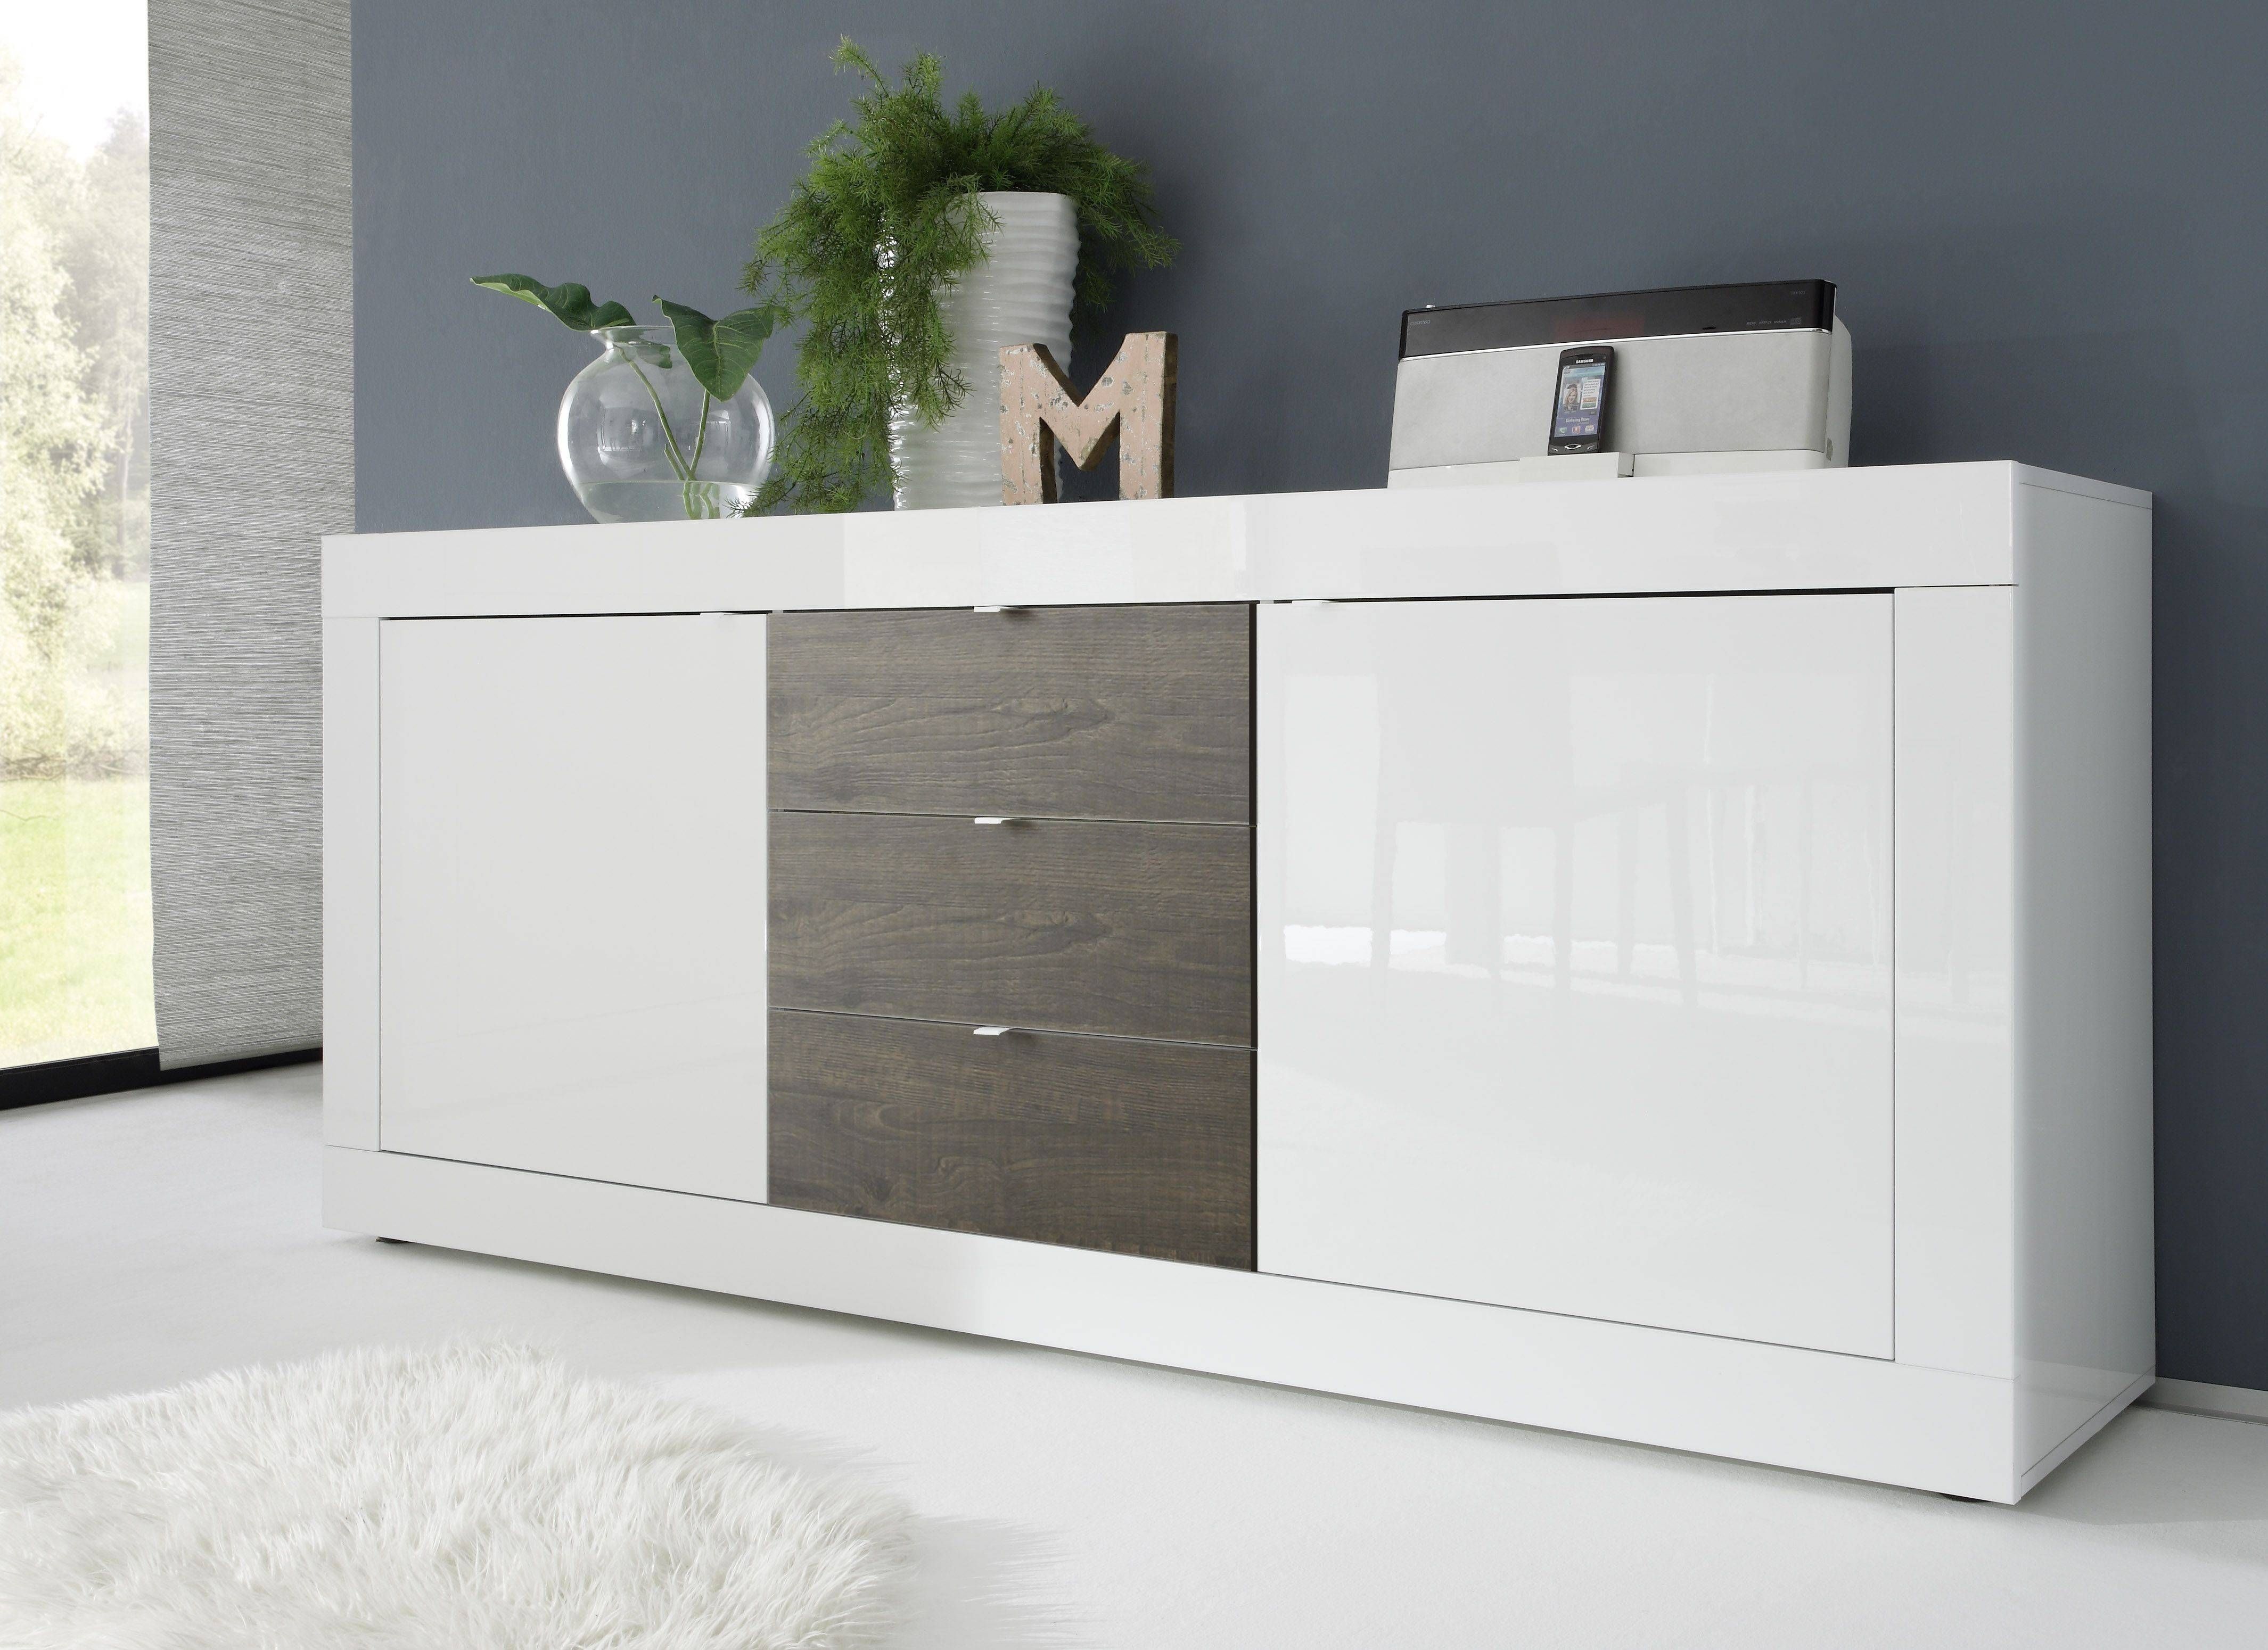 Dolcevita Ii White Gloss Sideboard – Sideboards – Sena Home Furniture With Regard To White High Gloss Sideboards (View 3 of 15)